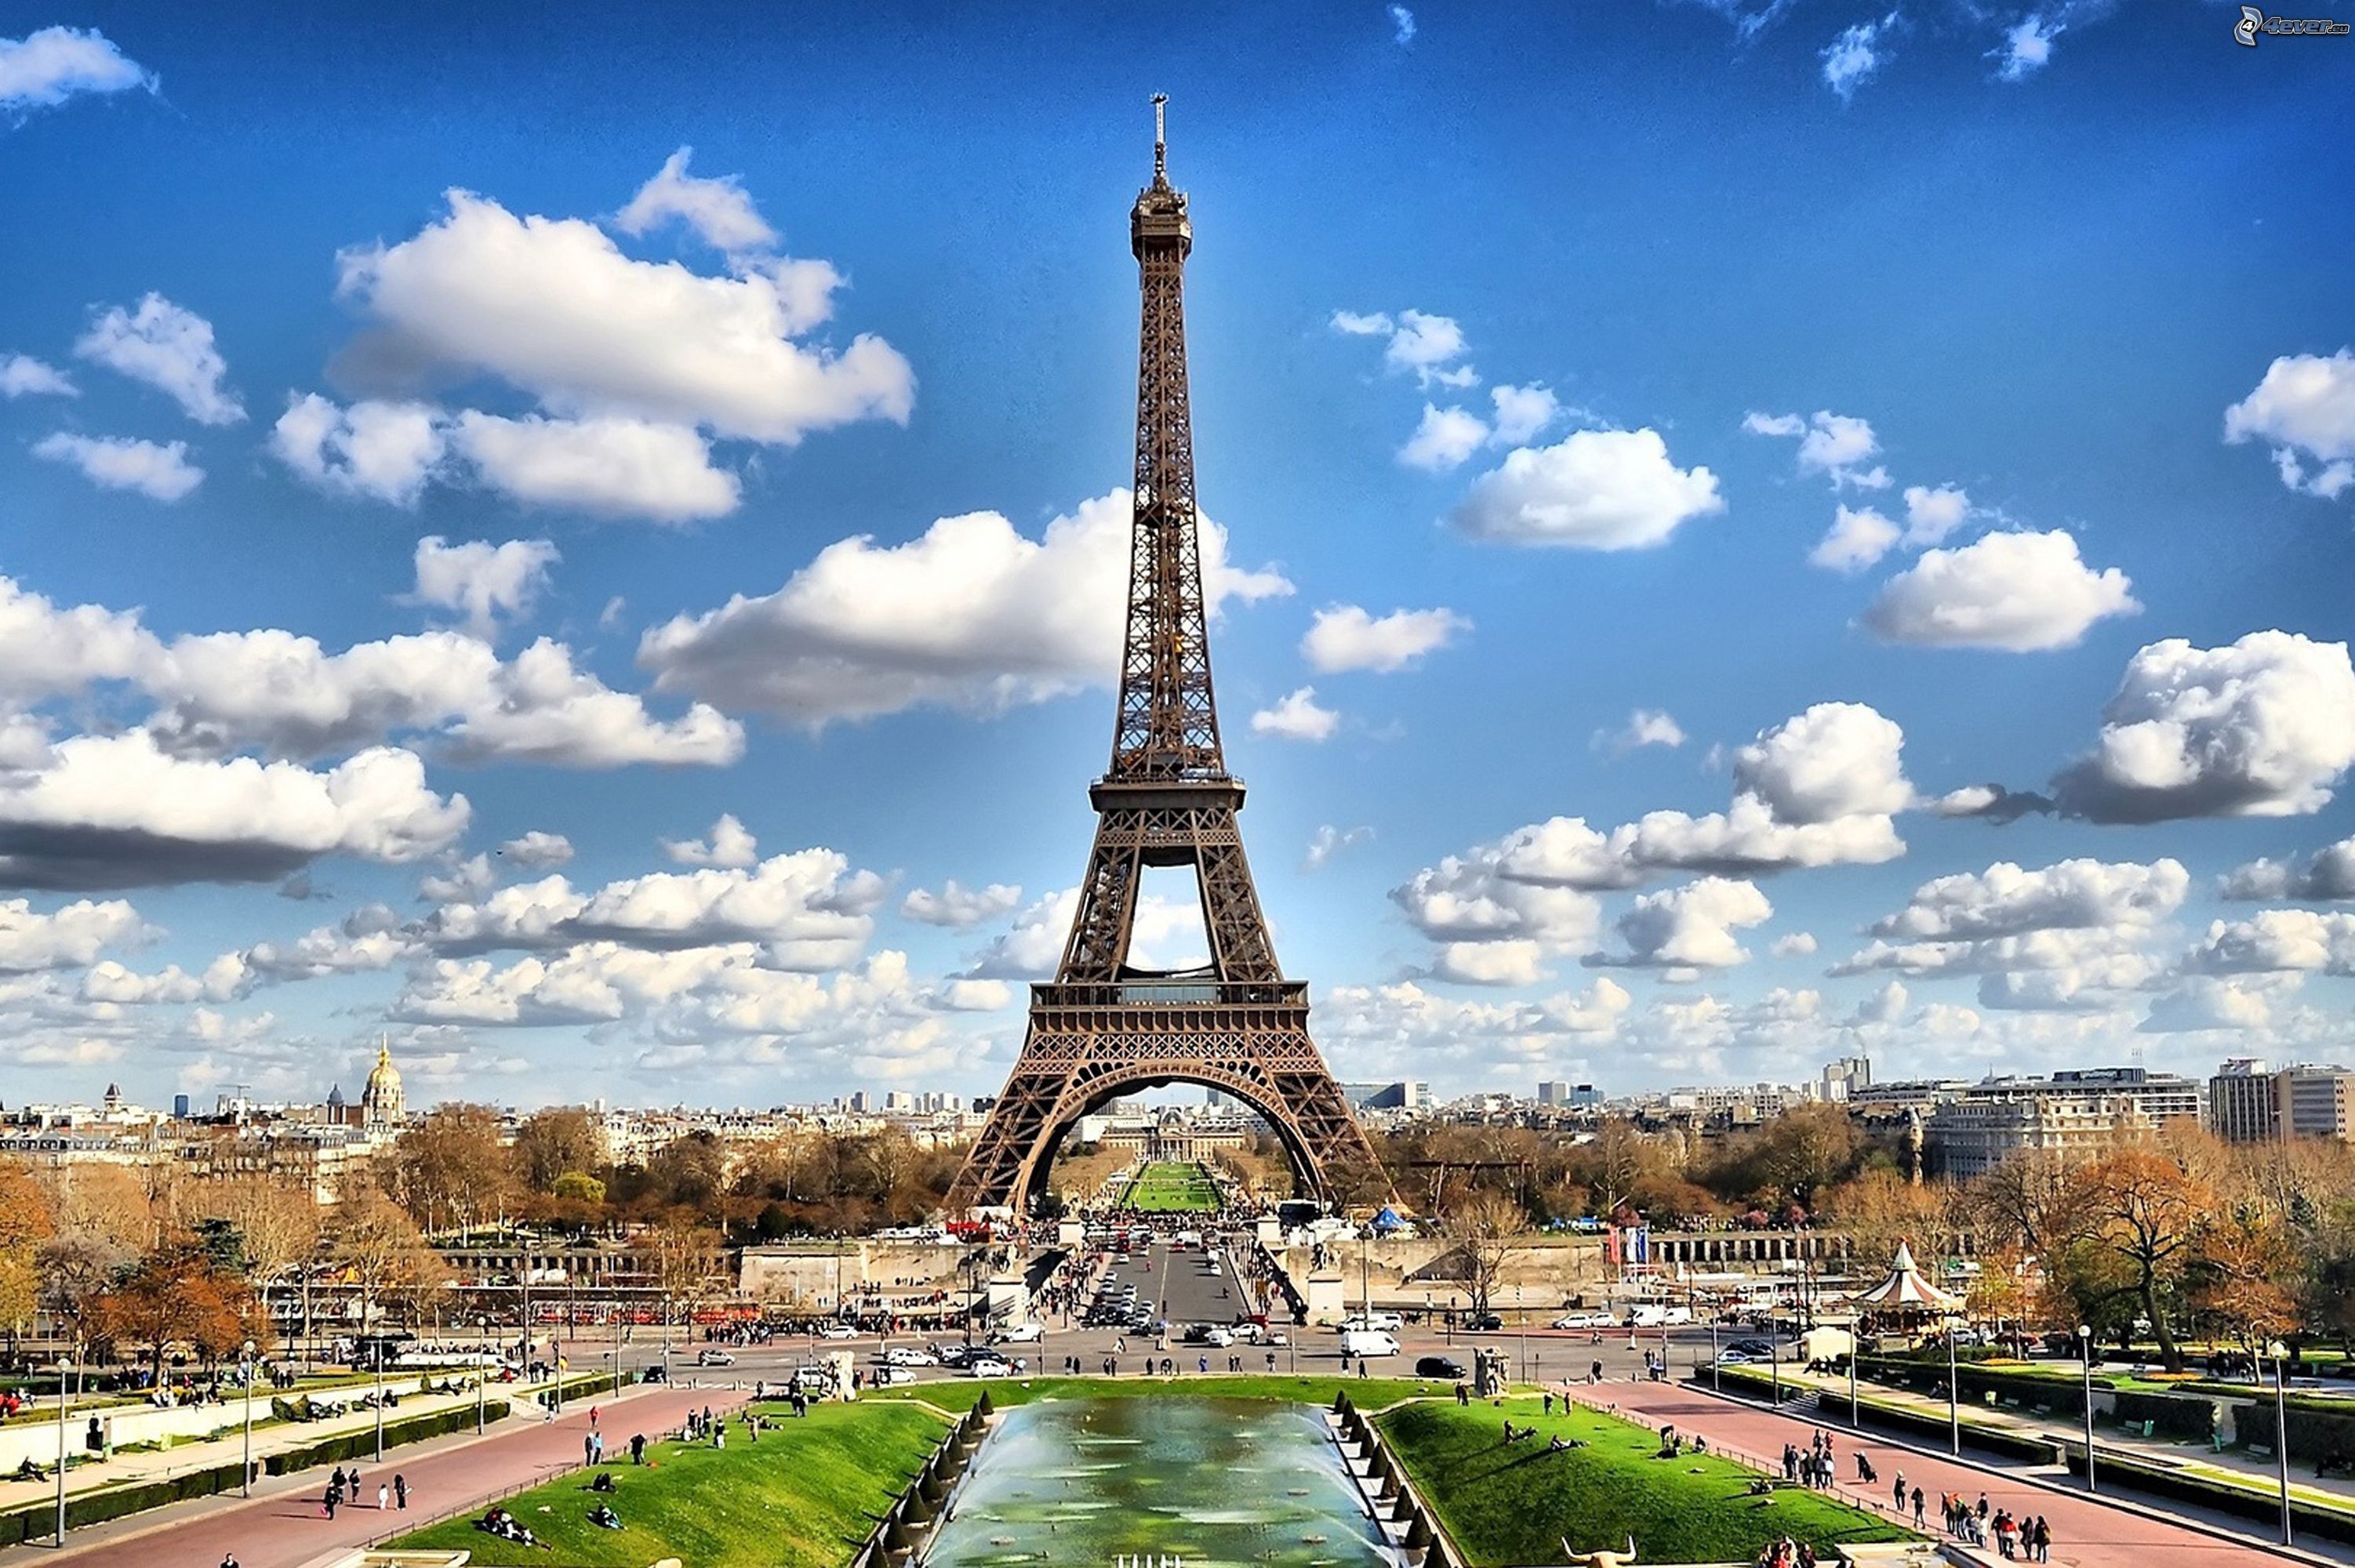 1,000+ Eiffel Tower Pictures & Images [HD] - Pixabay